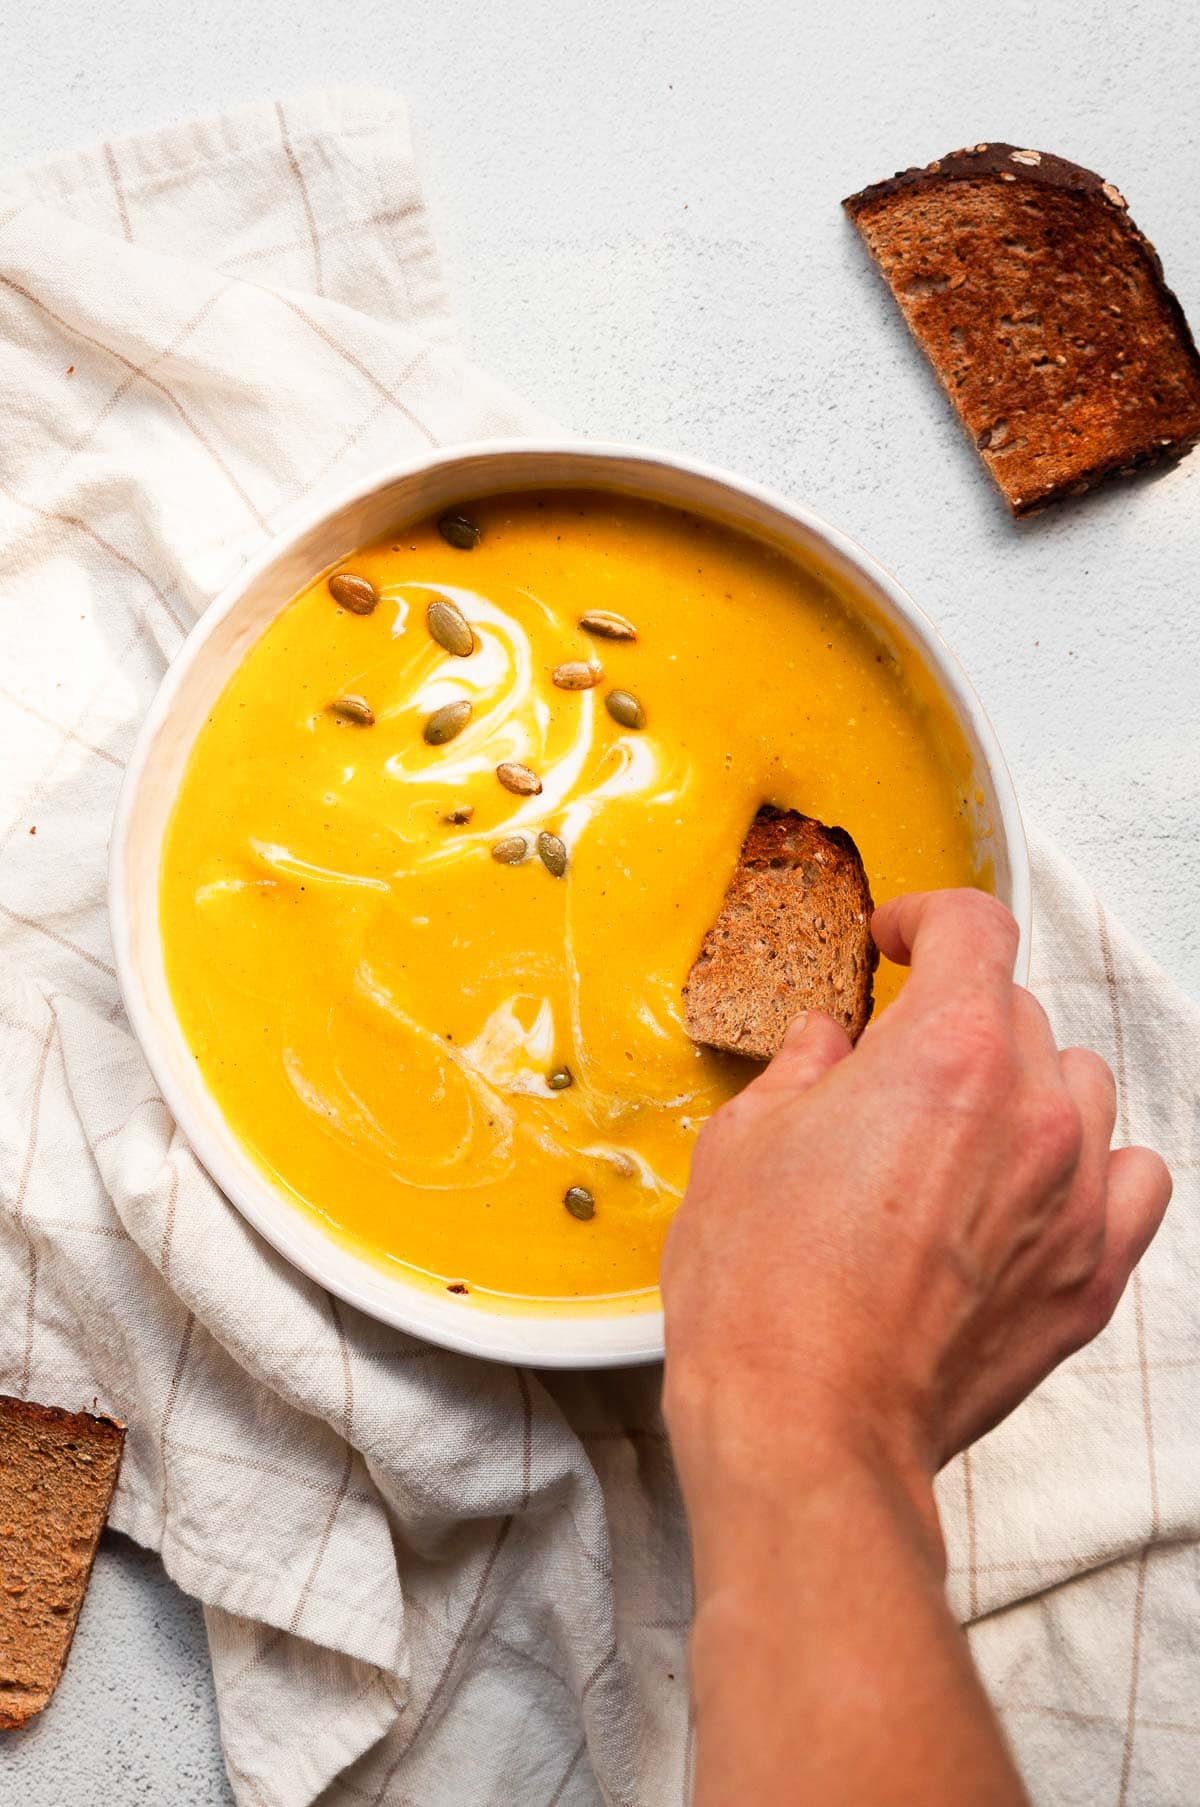 Hand dipping toast into a bowl with butternut squash soup.